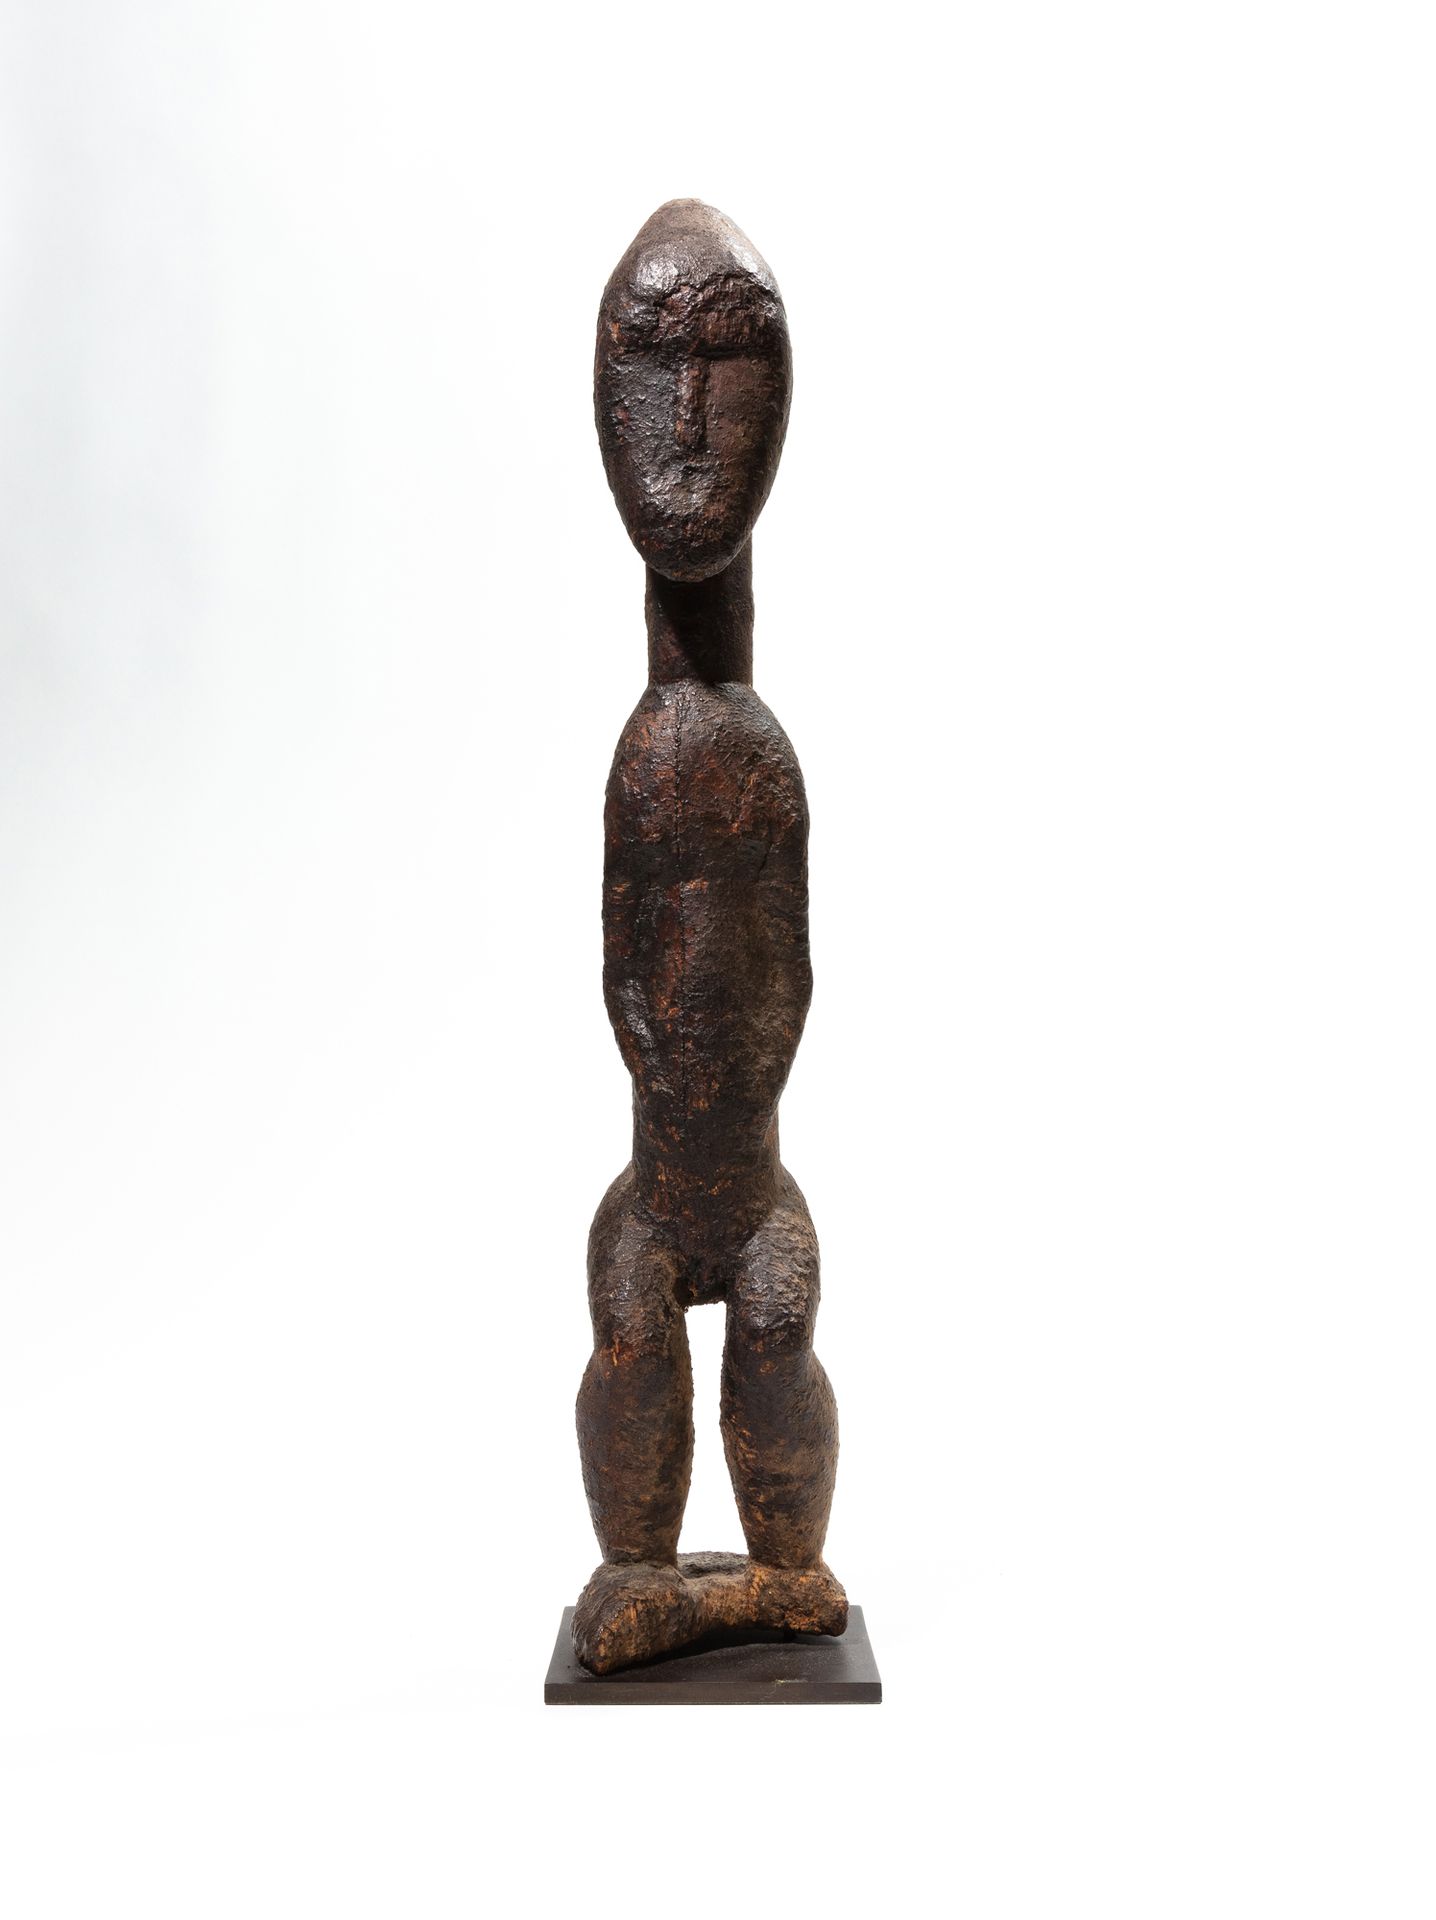 Null Baule statue, Ivory Coast
Wood
H. 45 cm
Male figure standing, arms along th&hellip;